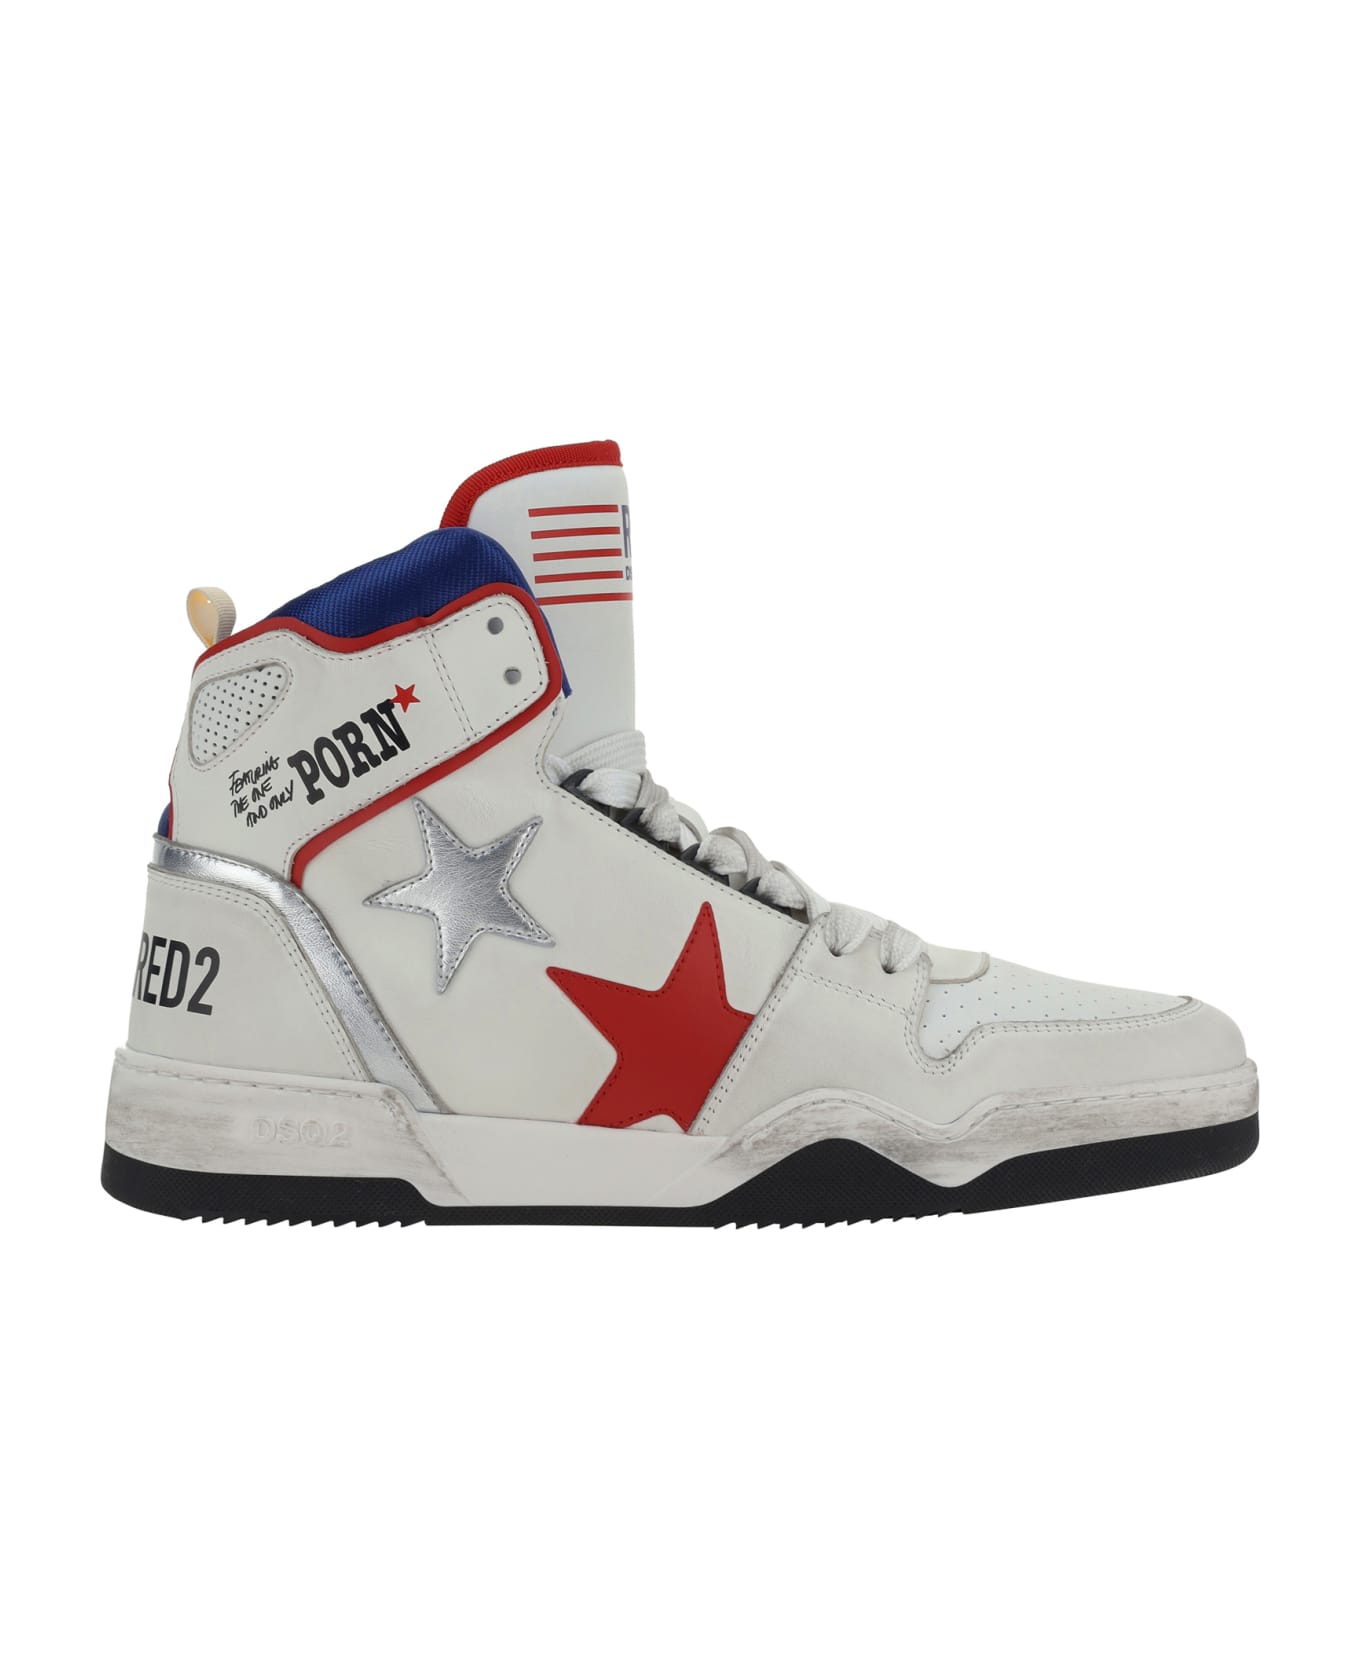 Dsquared2 Spiker High-top Sneakers - Bianco+rosso+blu